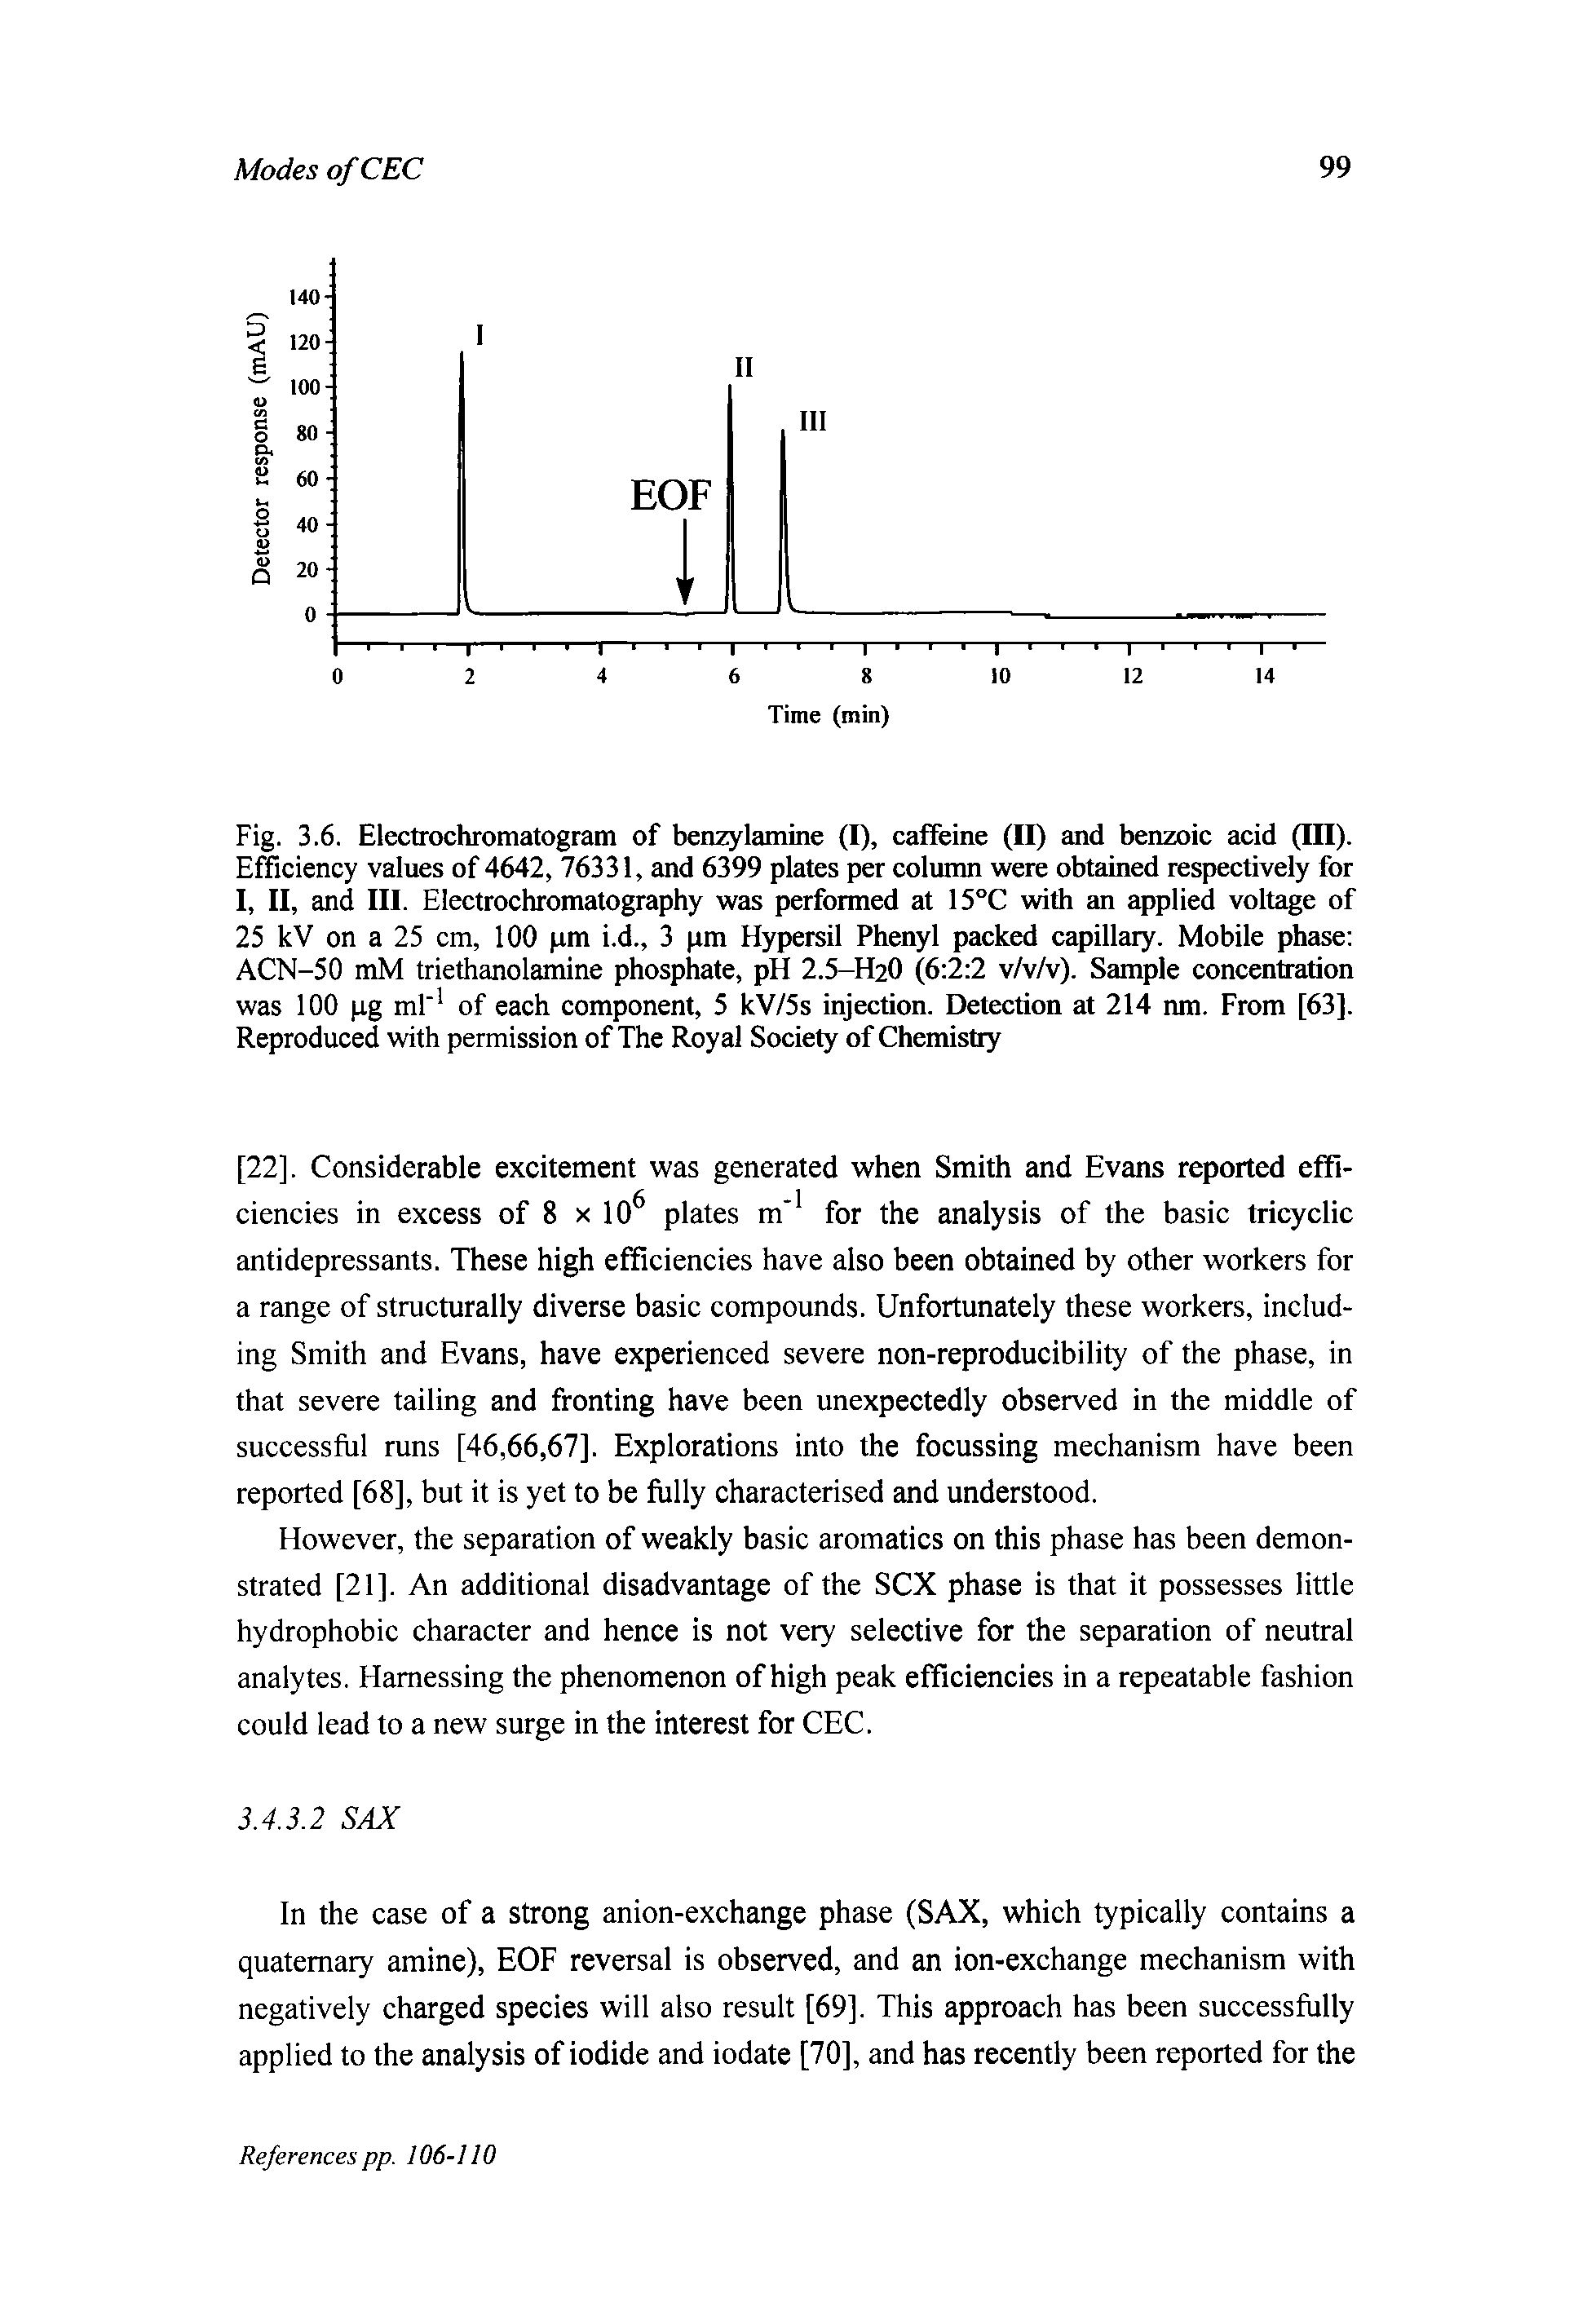 Fig. 3.6. Electrochromatogram of benzylamine (I), caffeine (II) and benzoic acid (III). Efficiency values of 4642, 76331, and 6399 plates per column were obtained respectively for I, II, and III. Electrochromatography was performed at 15°C with an applied voltage of 25 kV on a 25 cm, 100 pm i.d., 3 pm Hypersil Phenyl packed capillary. Mobile phase ACN-50 mM triethanolamine phosphate, pH 2.5-H20 (6 2 2 v/v/v). Sample concentration was 100 pg ml 1 of each component, 5 kV/5s injection. Detection at 214 nm. From [63]. Reproduced with permission of The Royal Society of Chemistry...